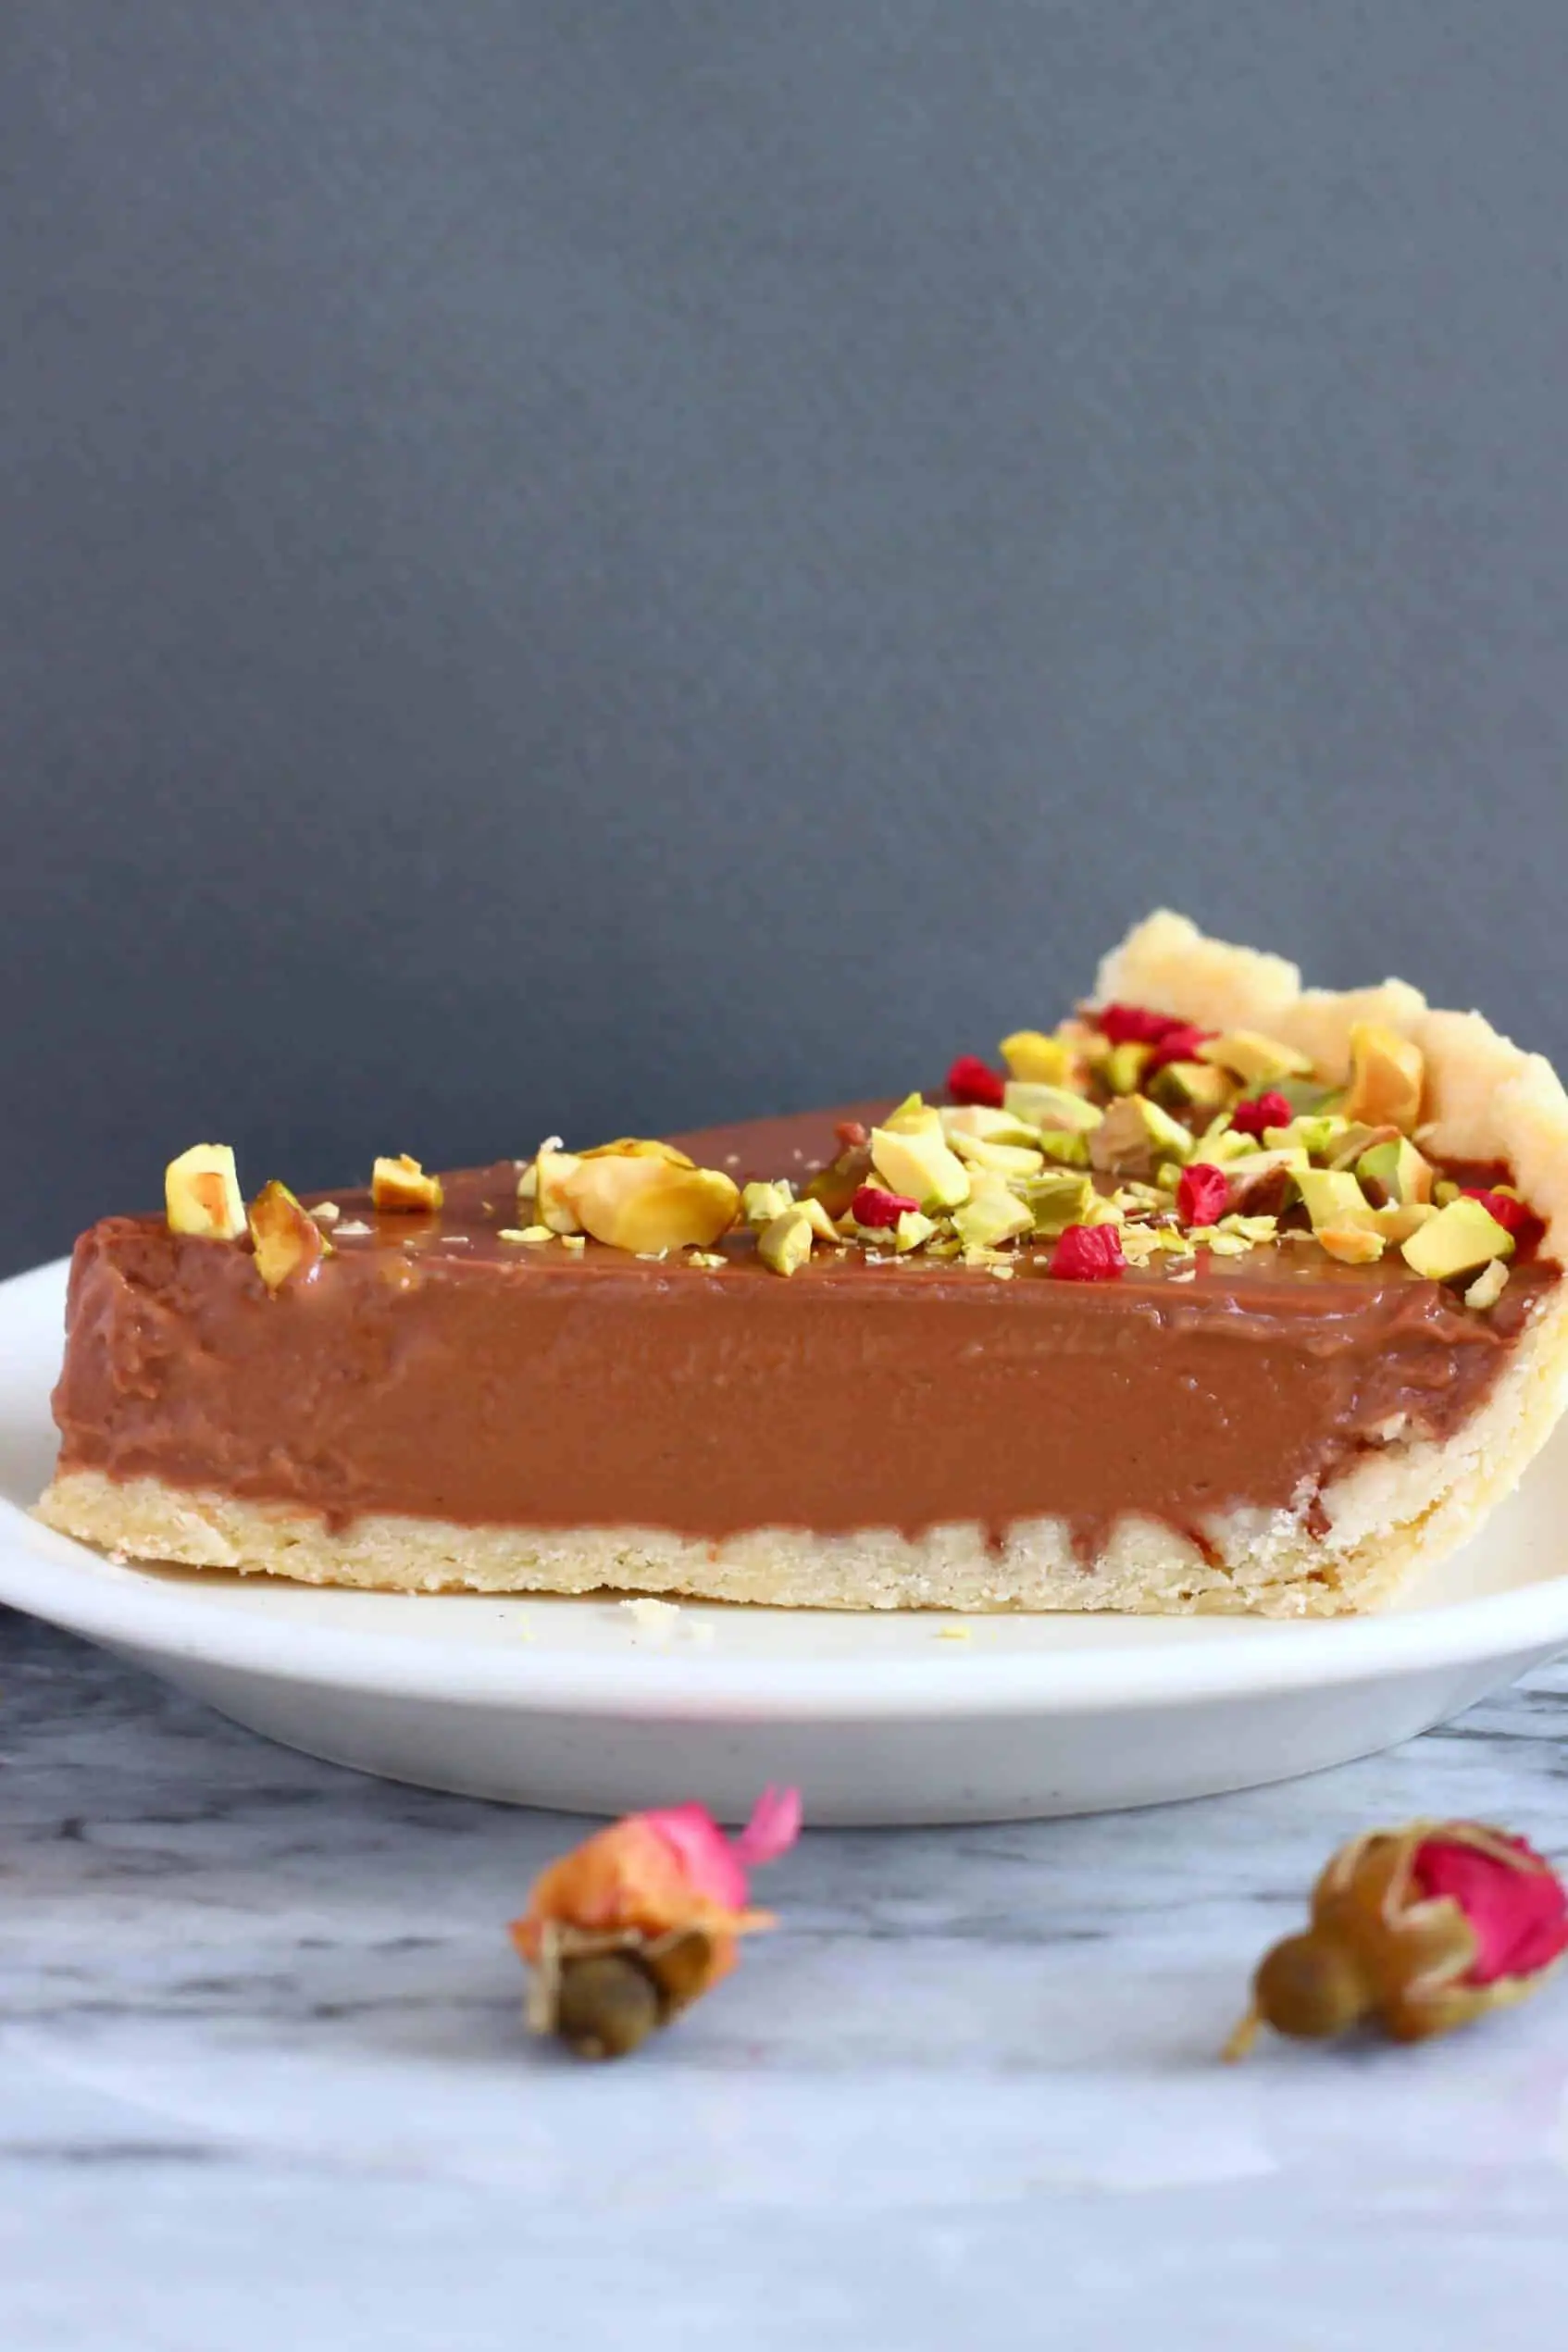 A slice of chocolate tart topped with chopped pistachios and freeze-dried raspberries on a white plate against a grey background